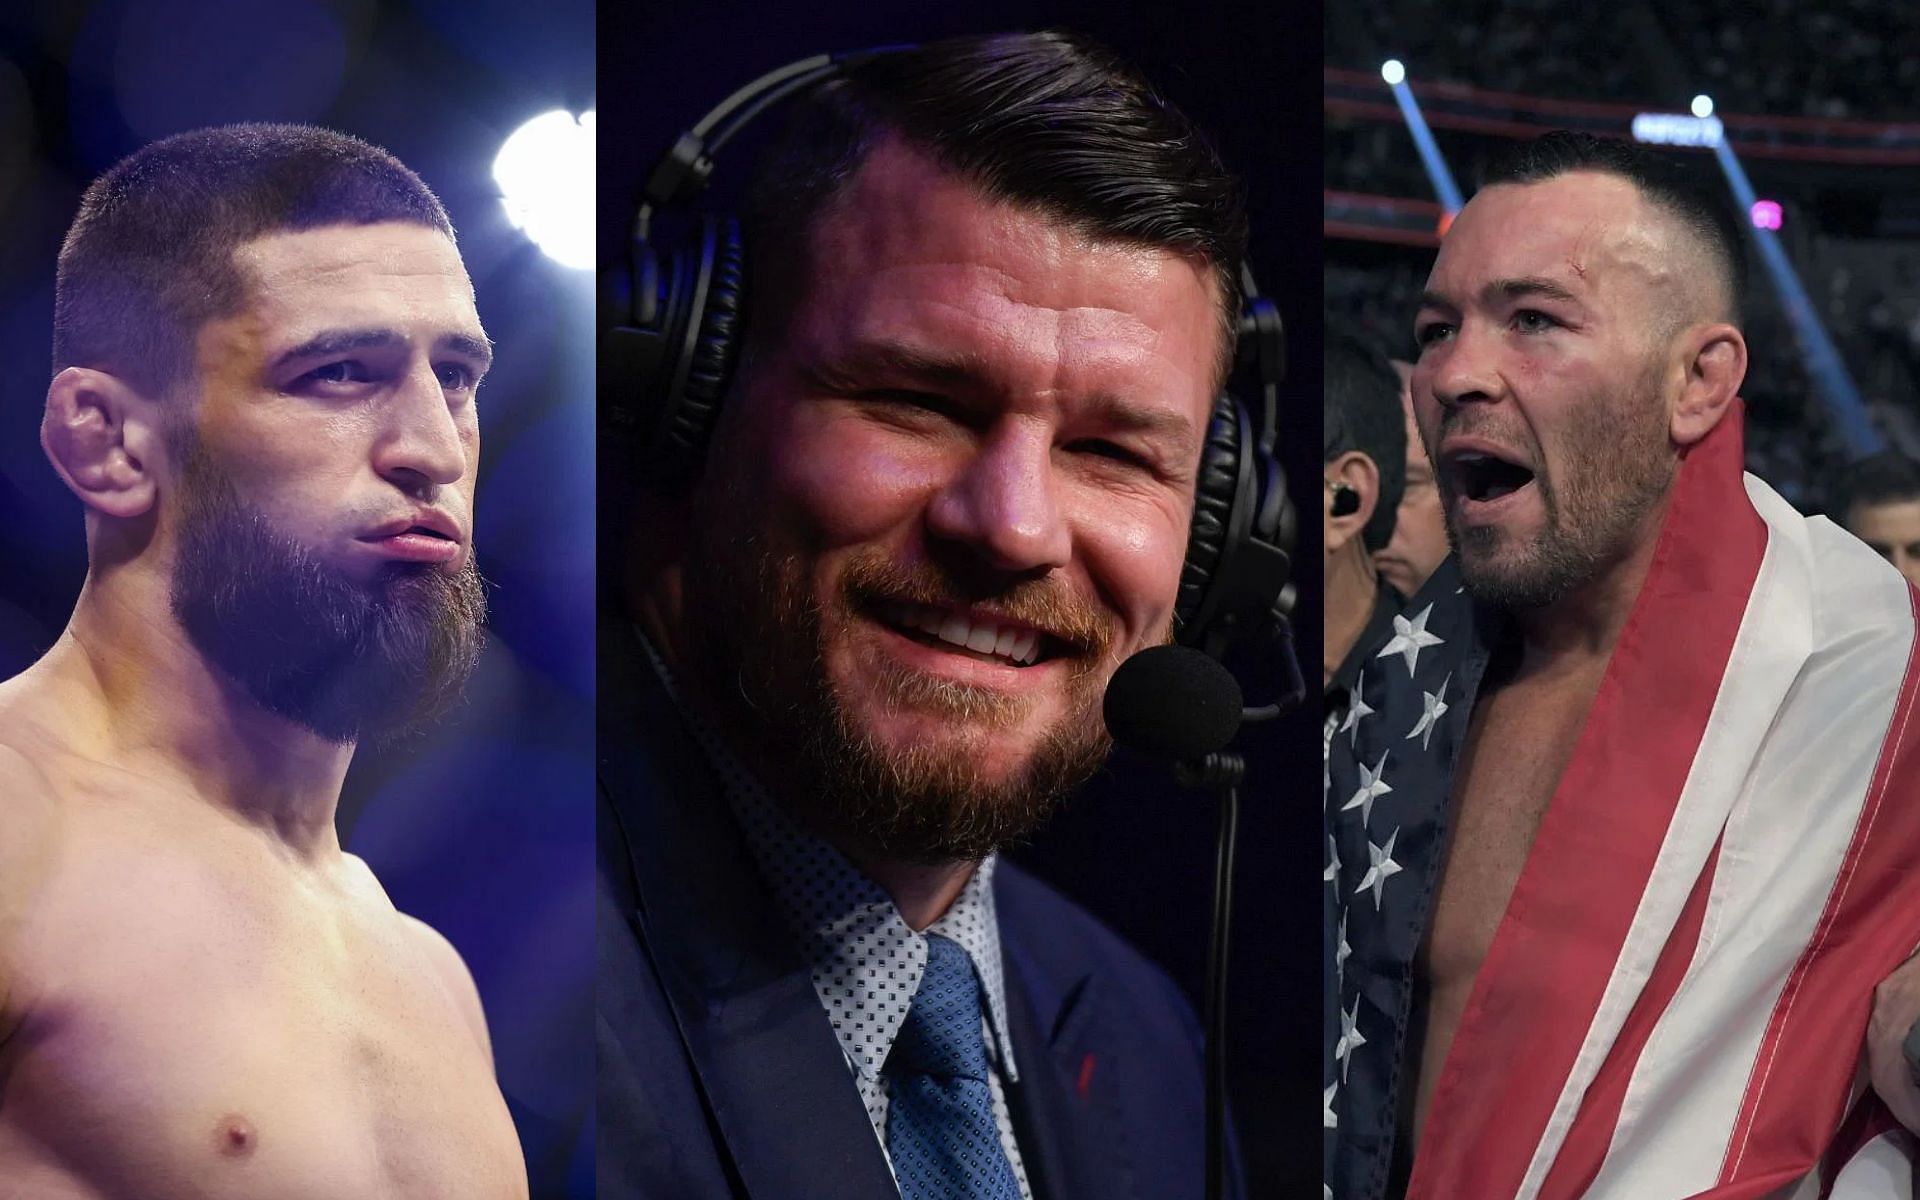 Khamzat Chimaev (left), Michael Bisping (middle) and Colby Covington (right)